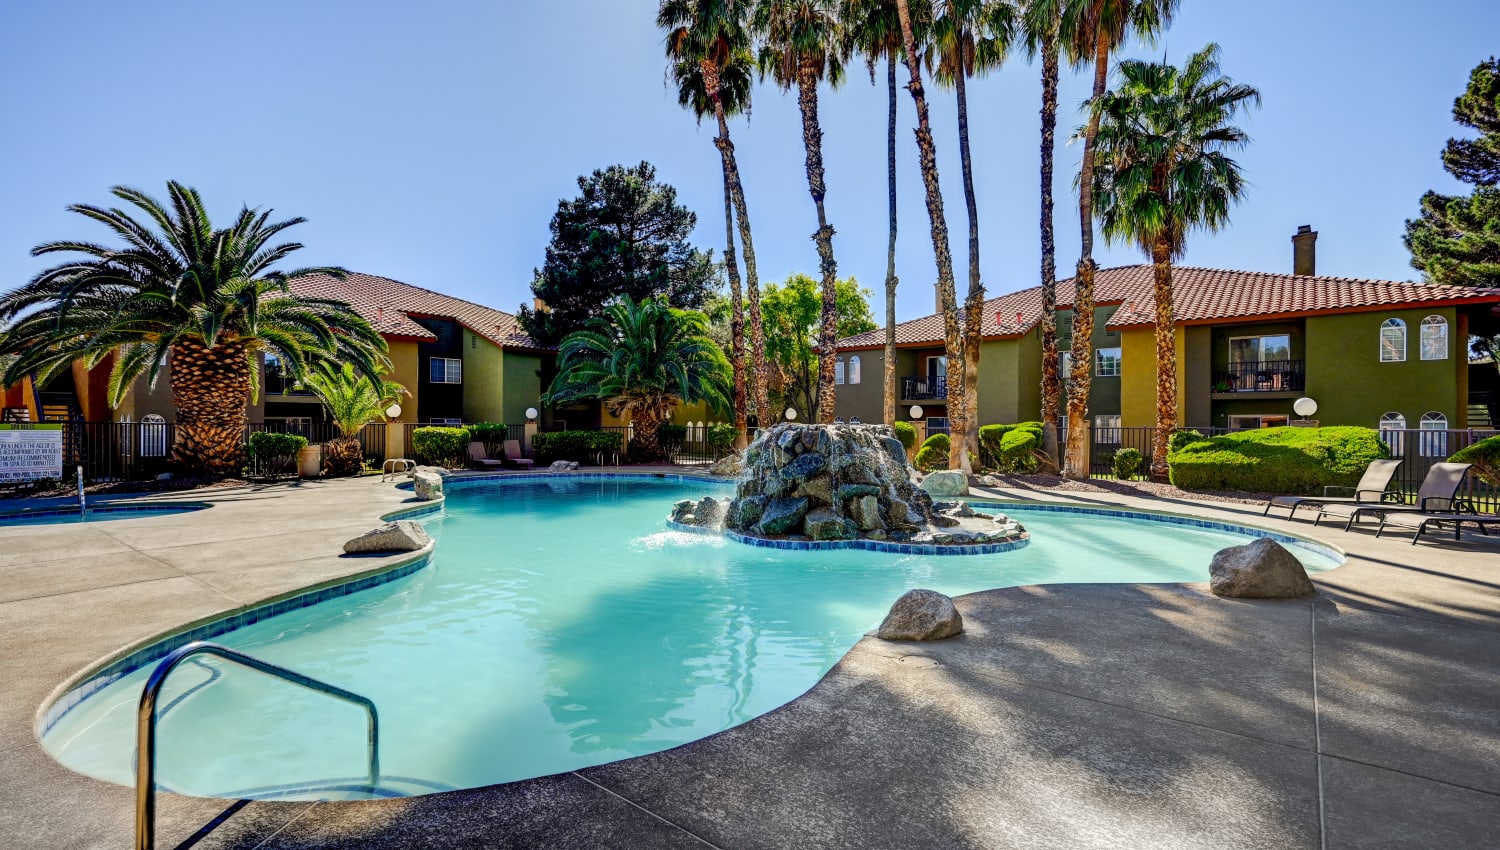 Pool and spa area at Hidden Cove Apartments in Las Vegas, Nevada